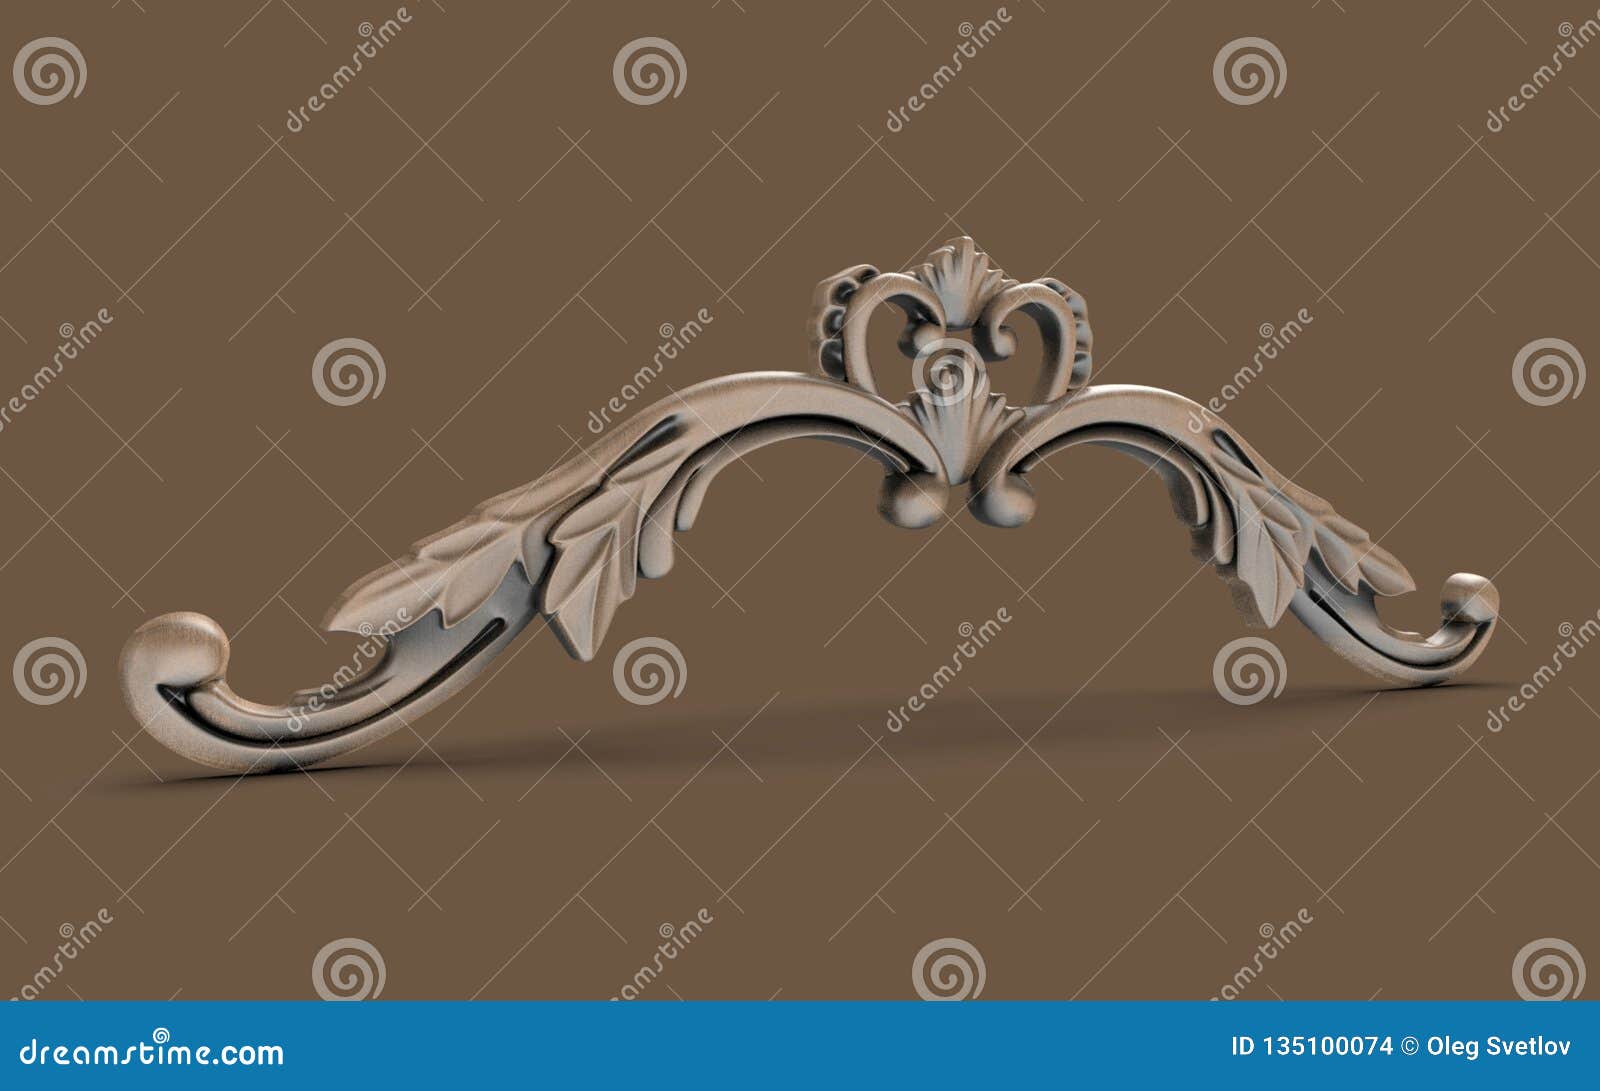 Drawing for edition, emblem, coat of arms, business, amulet, prediction, future, decoration, wooden, artifact, interior, painting,. graphic design, architecture, illustration, symbol, welfare, isolated, art, nature, star, red, bright, 3d models for interior, decoration, black, wood, artifact, brown, interior, painting, vintage, artist, inspiration, decoration, work, ornament, retro, decor, gold, angel, history, medicine, healing, unique, Royal, ruins, ancient.